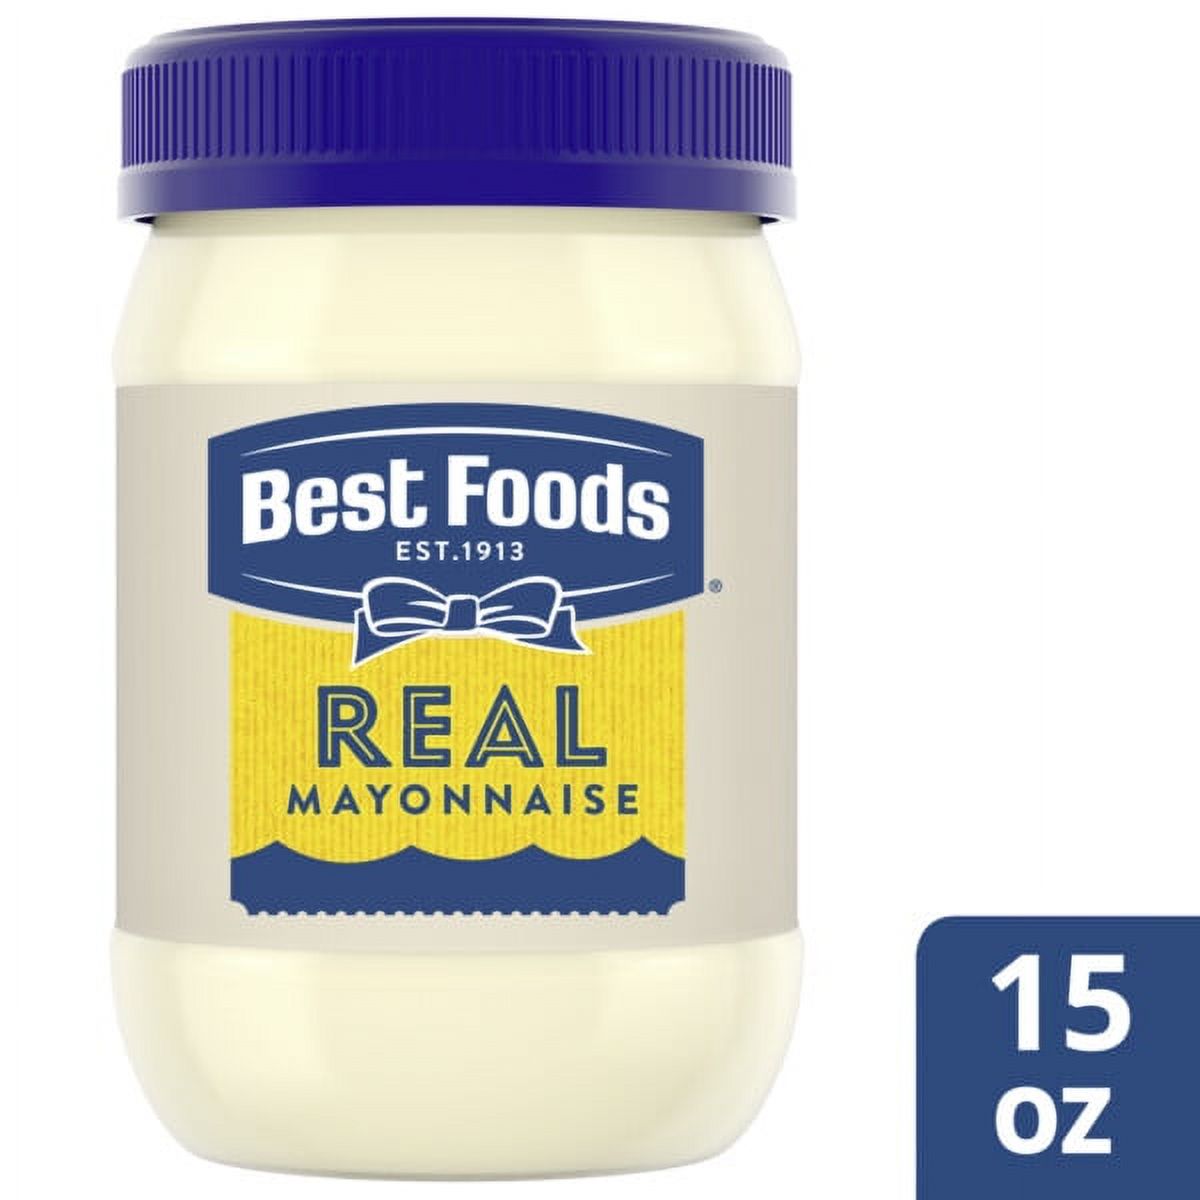 Best Foods Made with Cage Free Eggs Real Mayonnaise, 15 fl oz Jar - image 1 of 12